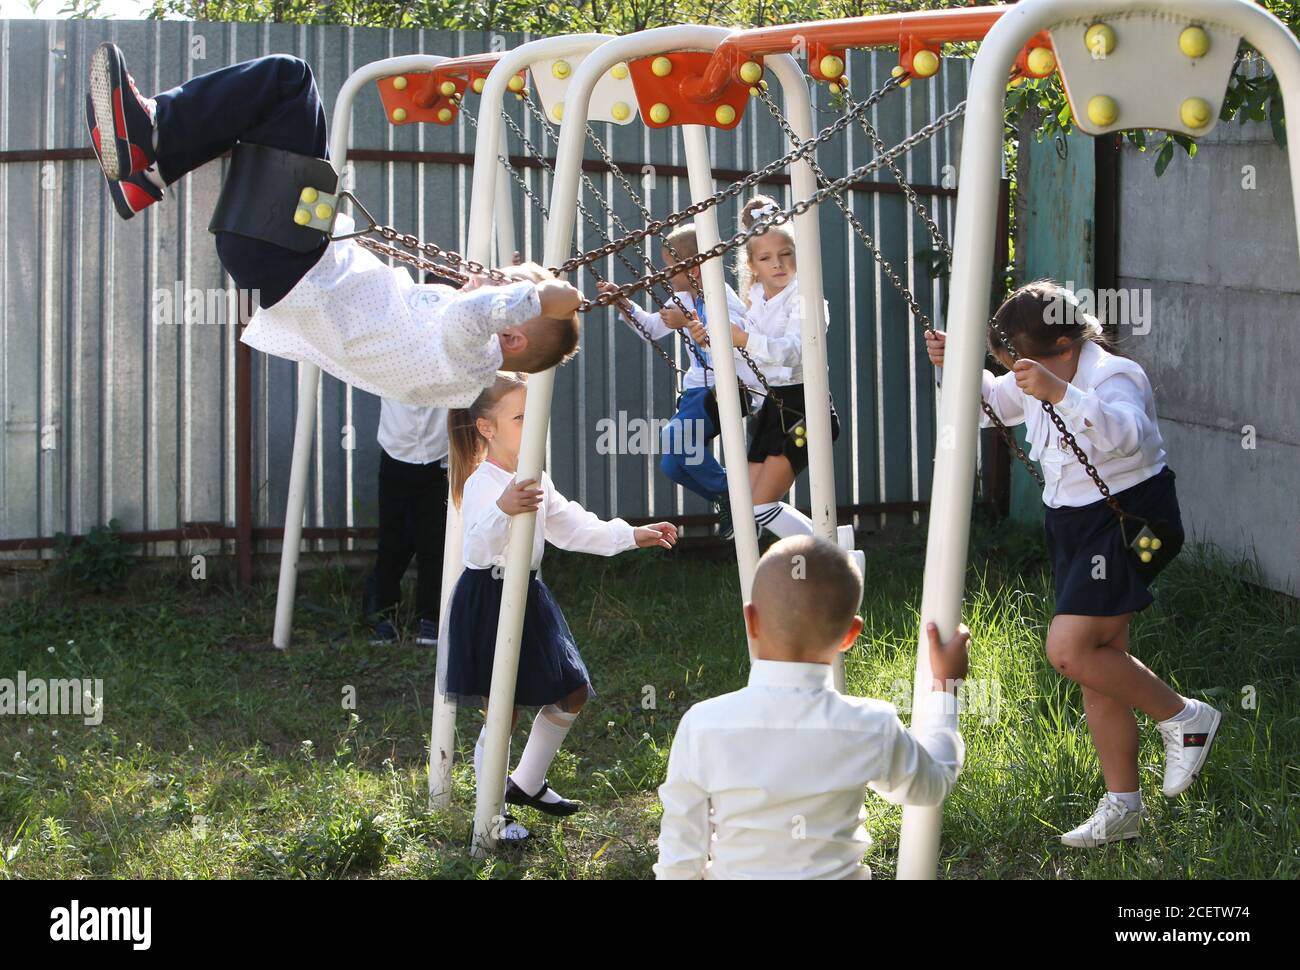 Kiev, Ukraine. 1st Sep, 2020. First graders play on swings at a school in Kiev Oblast, Ukraine, Sept. 1, 2020. Over 4.2 million students have resumed their studies in Ukraine, including 428,000 first-graders, as the country marks the start of the new school year. Children from the 21 cities and districts in 'red' quarantine zones will not return to school in person, instead studying remotely until the epidemiological situation changes. Credit: Sergey Starostenko/Xinhua/Alamy Live News Stock Photo